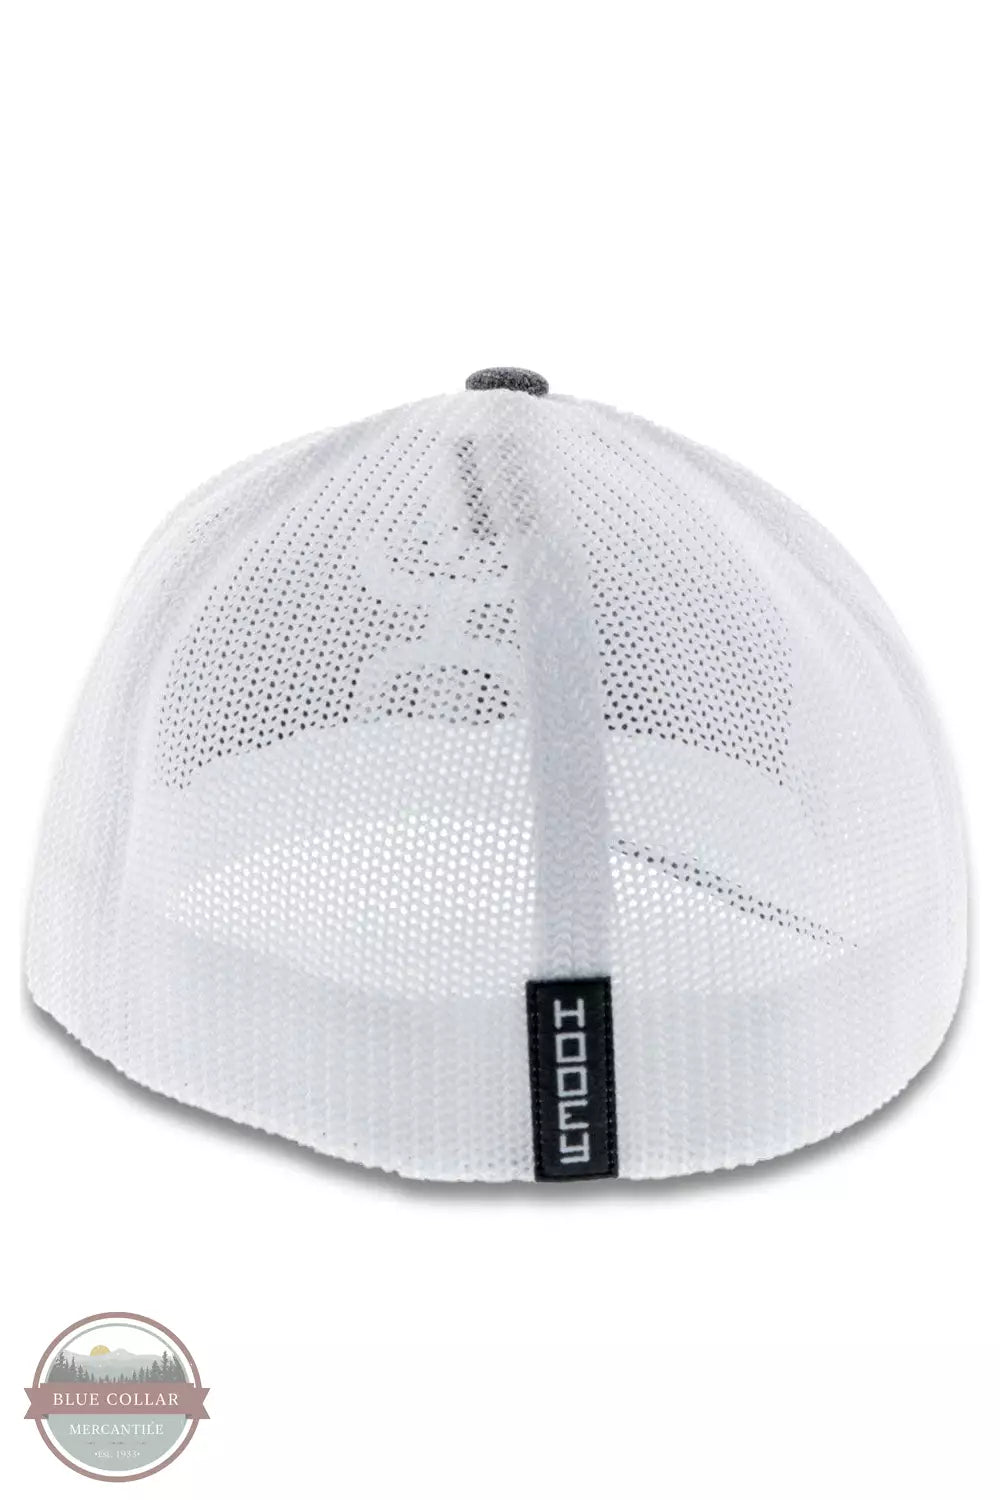 Hooey 2011GYWH Cayman Grey / White Cap Back View